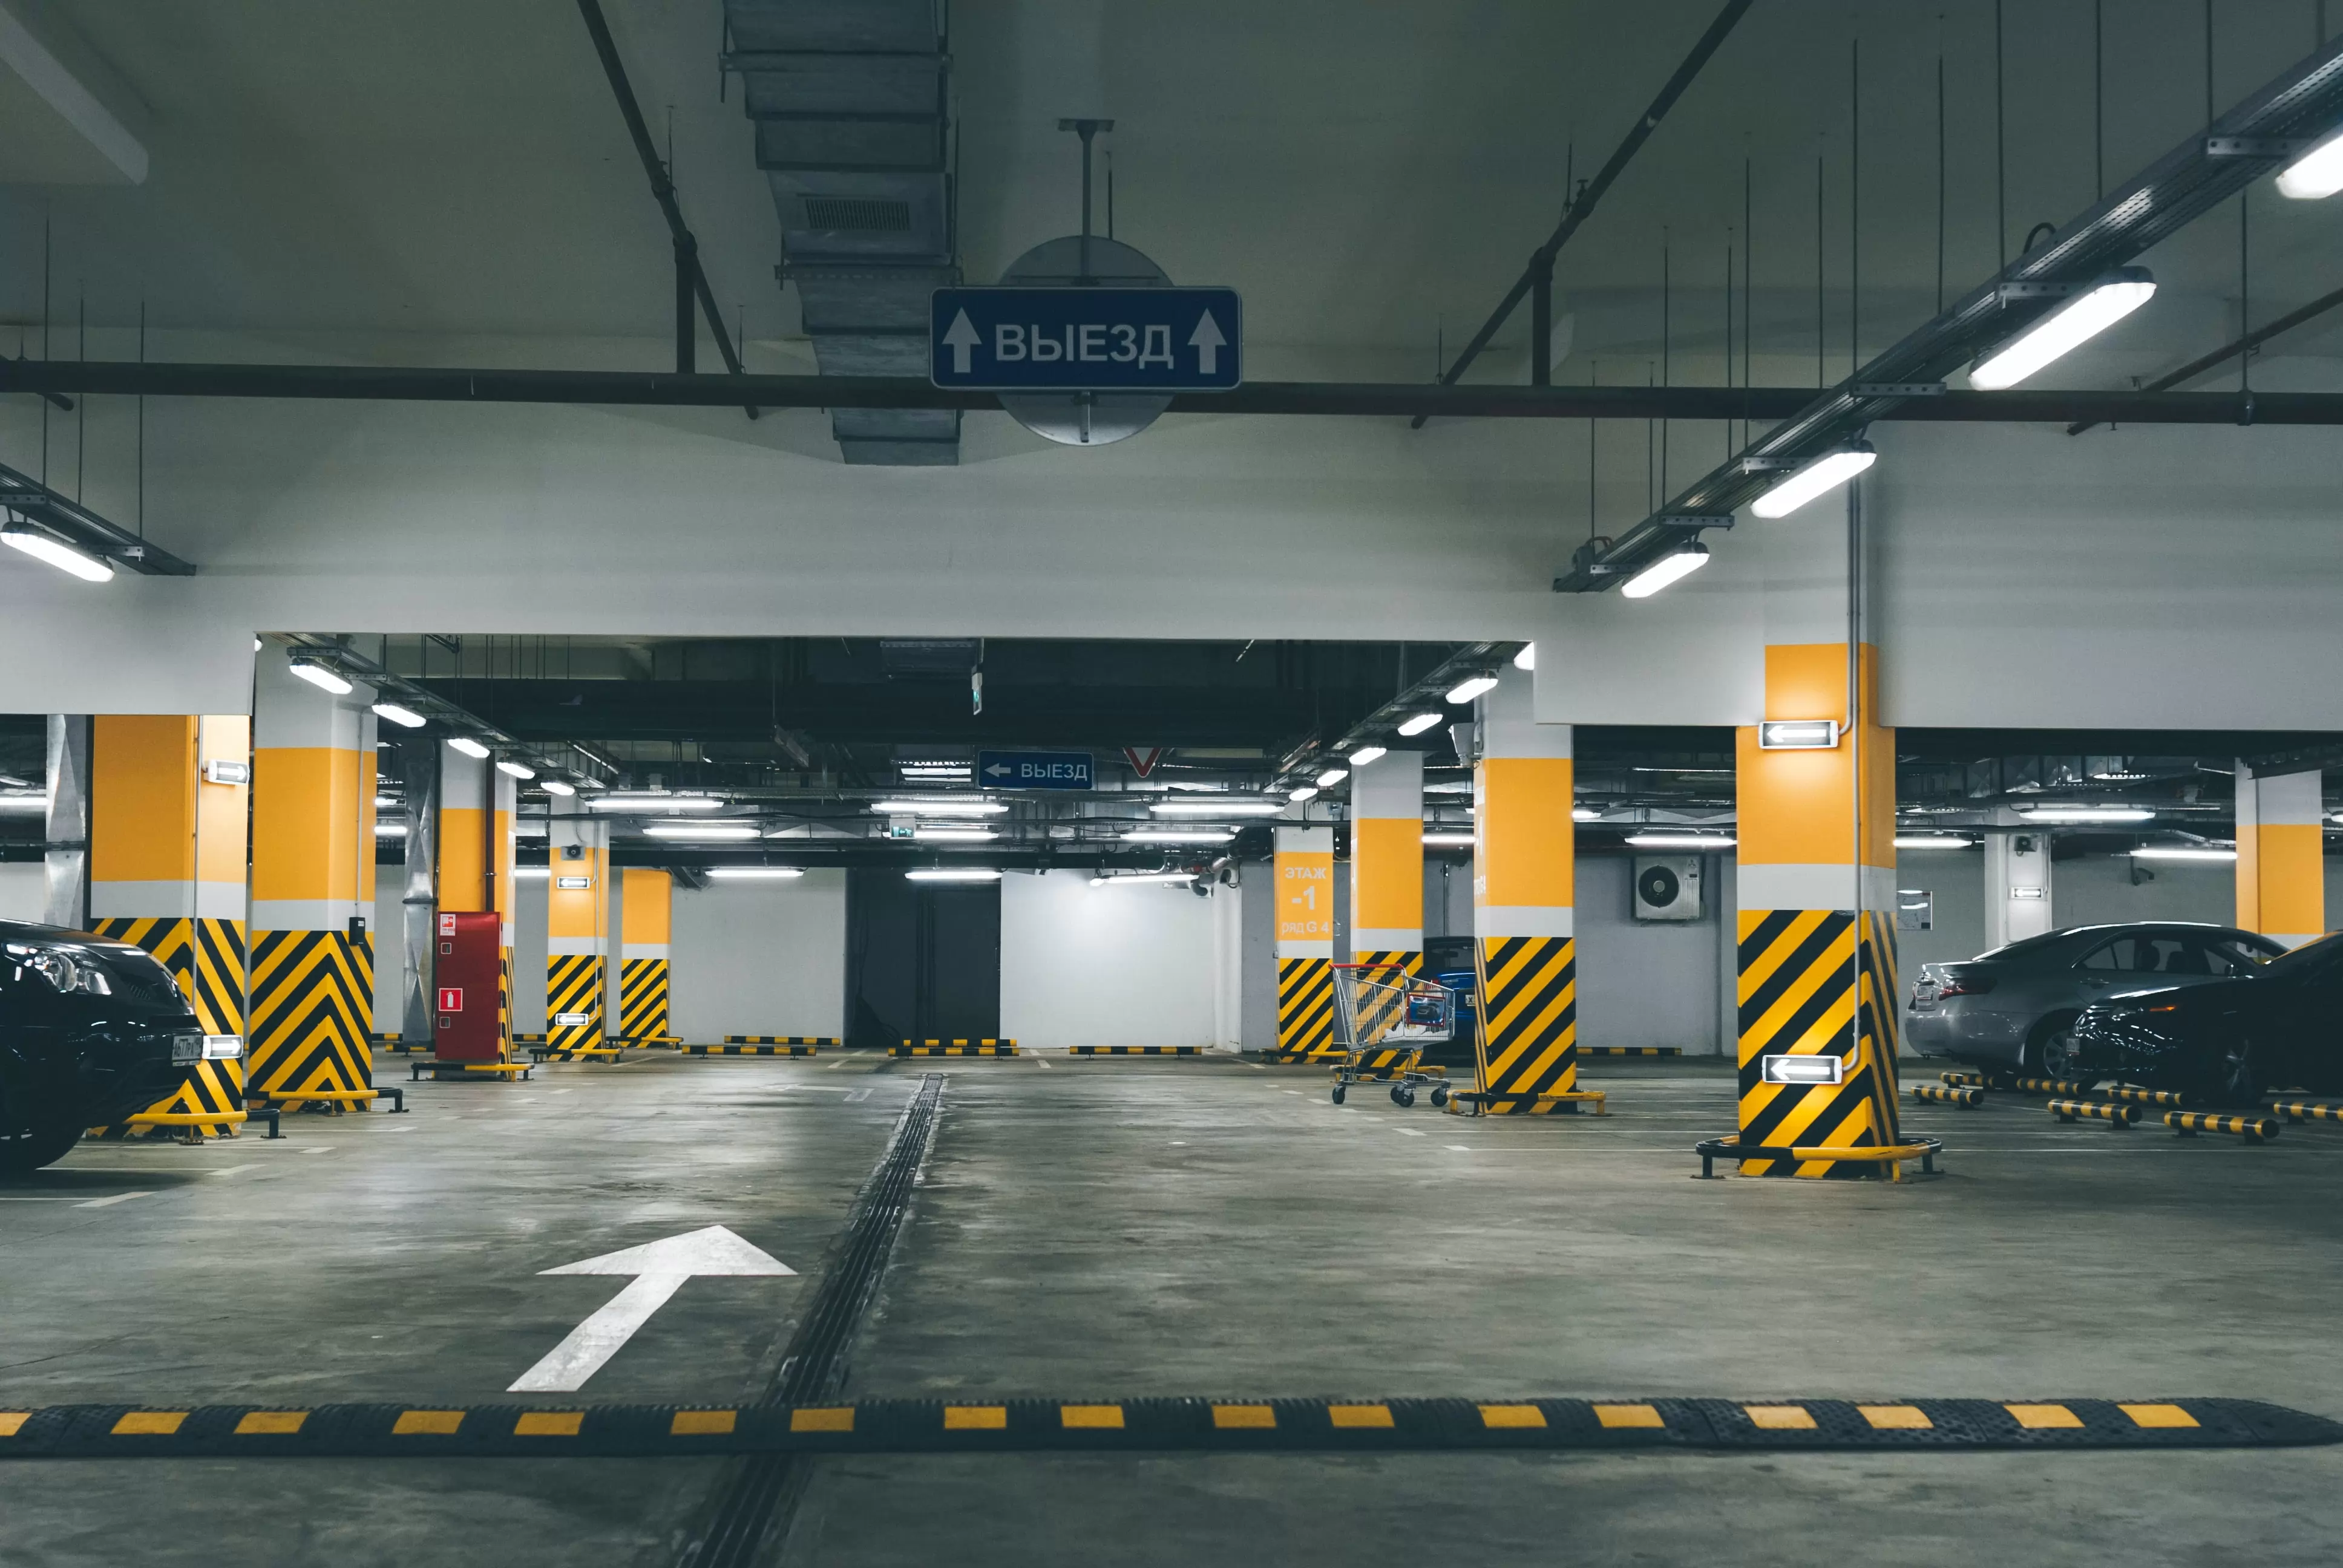 the private parking market